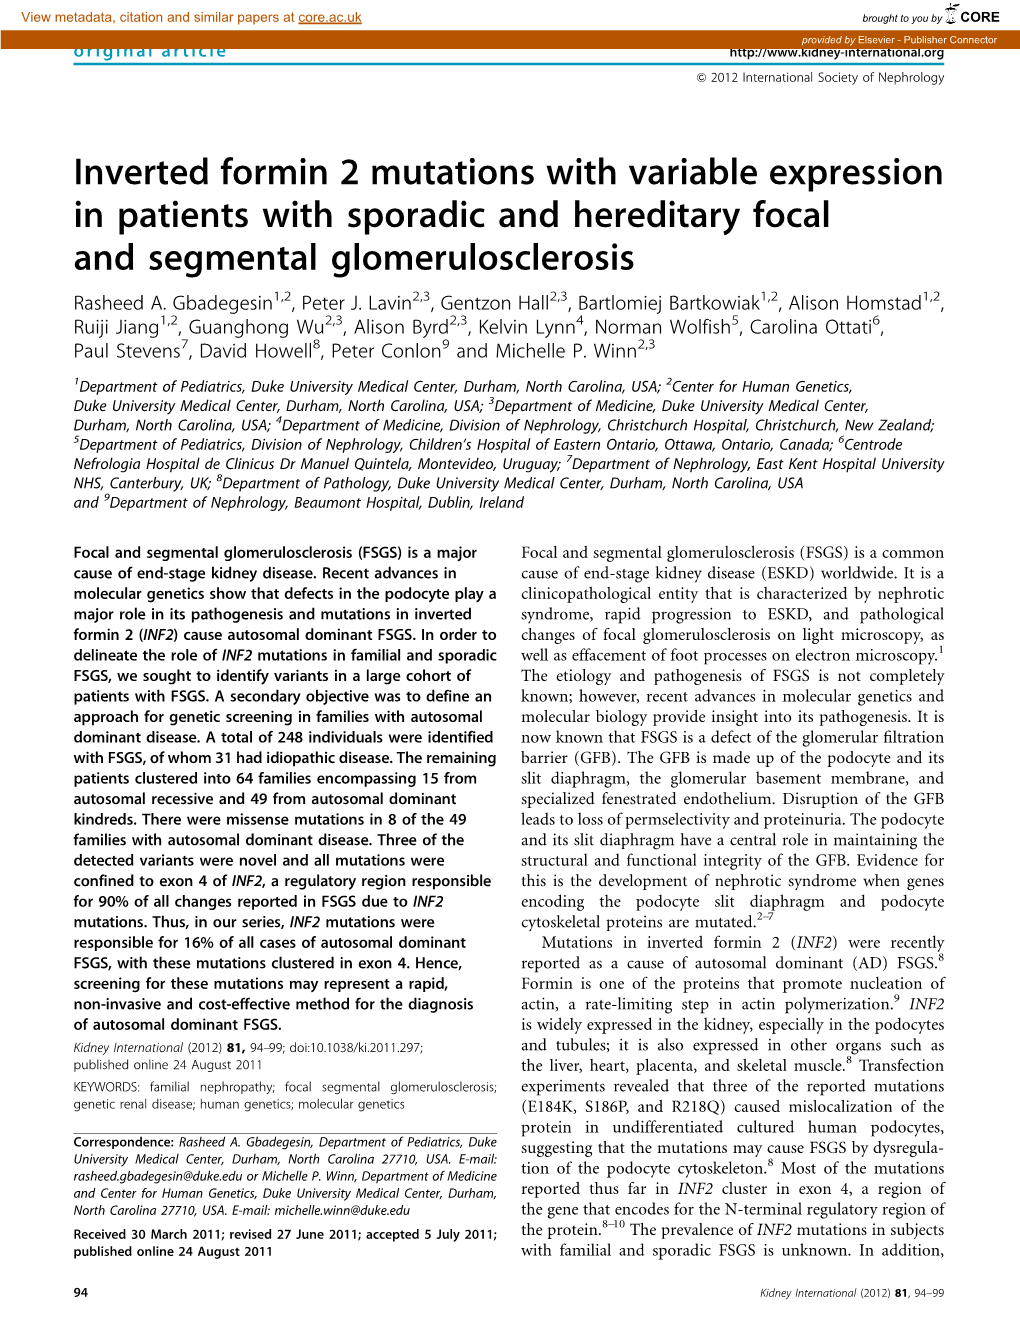 Inverted Formin 2 Mutations with Variable Expression in Patients with Sporadic and Hereditary Focal and Segmental Glomerulosclerosis Rasheed A